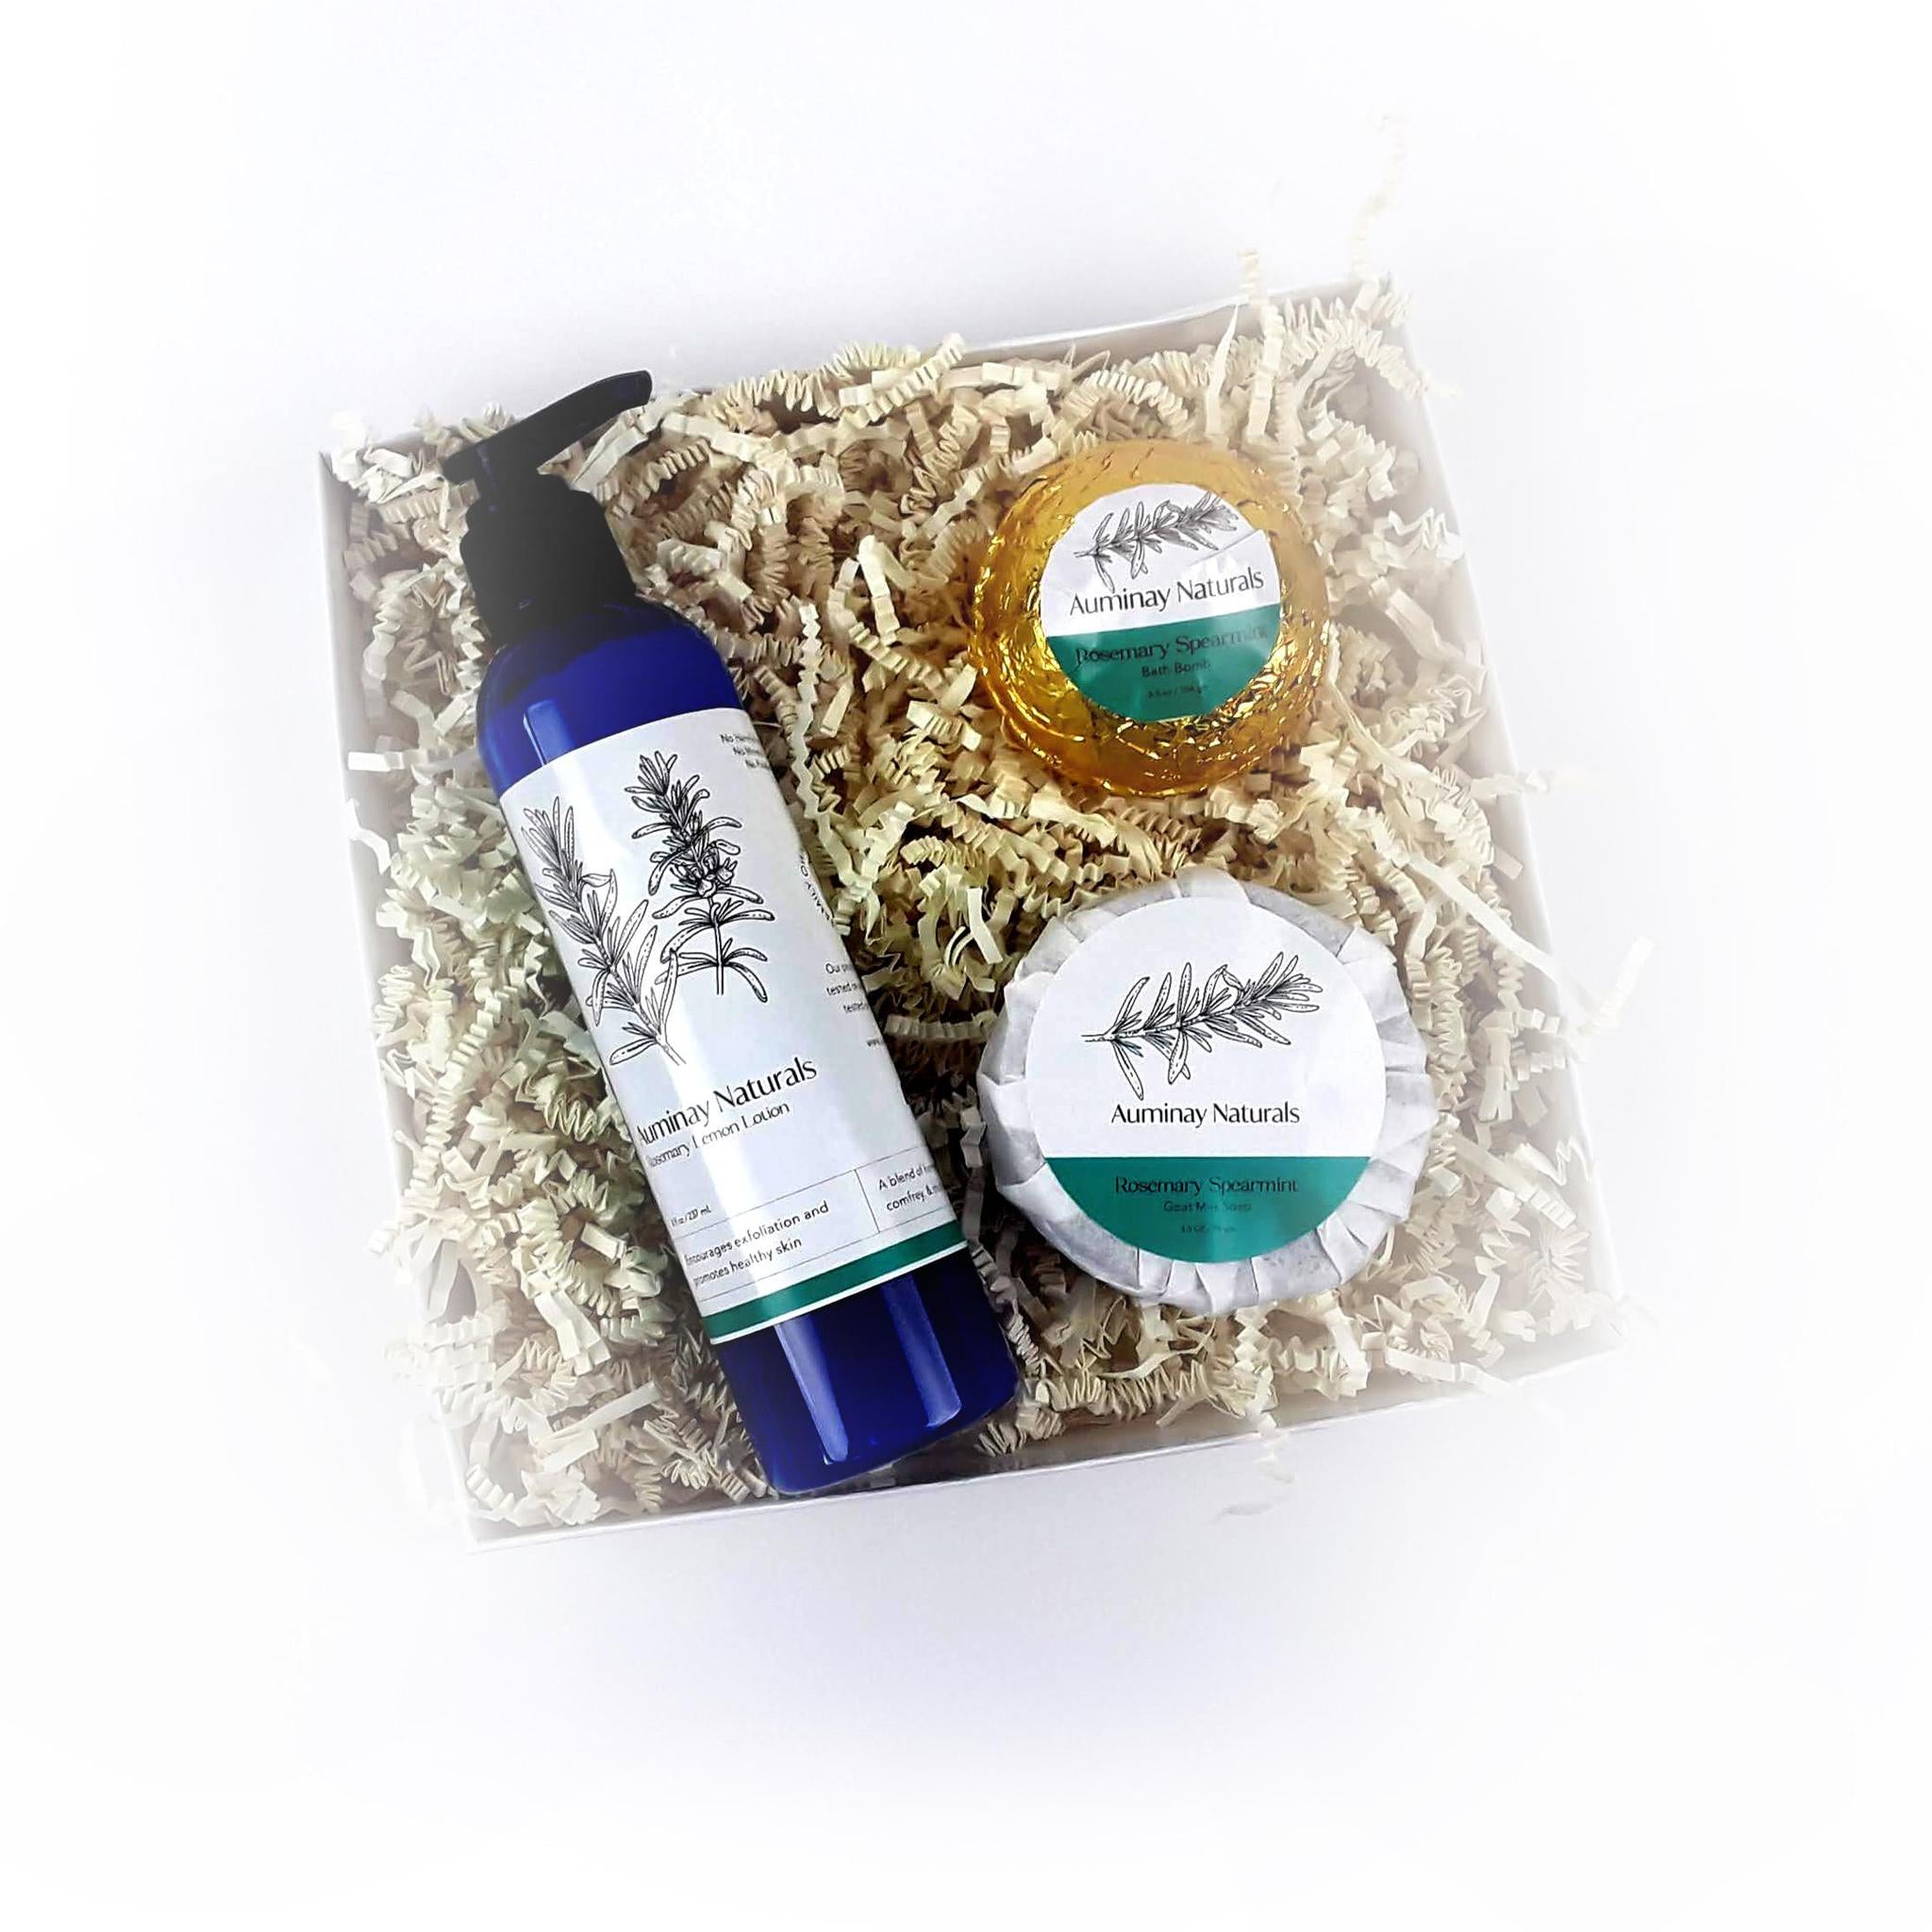 Rosemary Spa Set | Balancing self care gift set with lotion, bath bomb, and goat milk soap from Auminay Naturals.